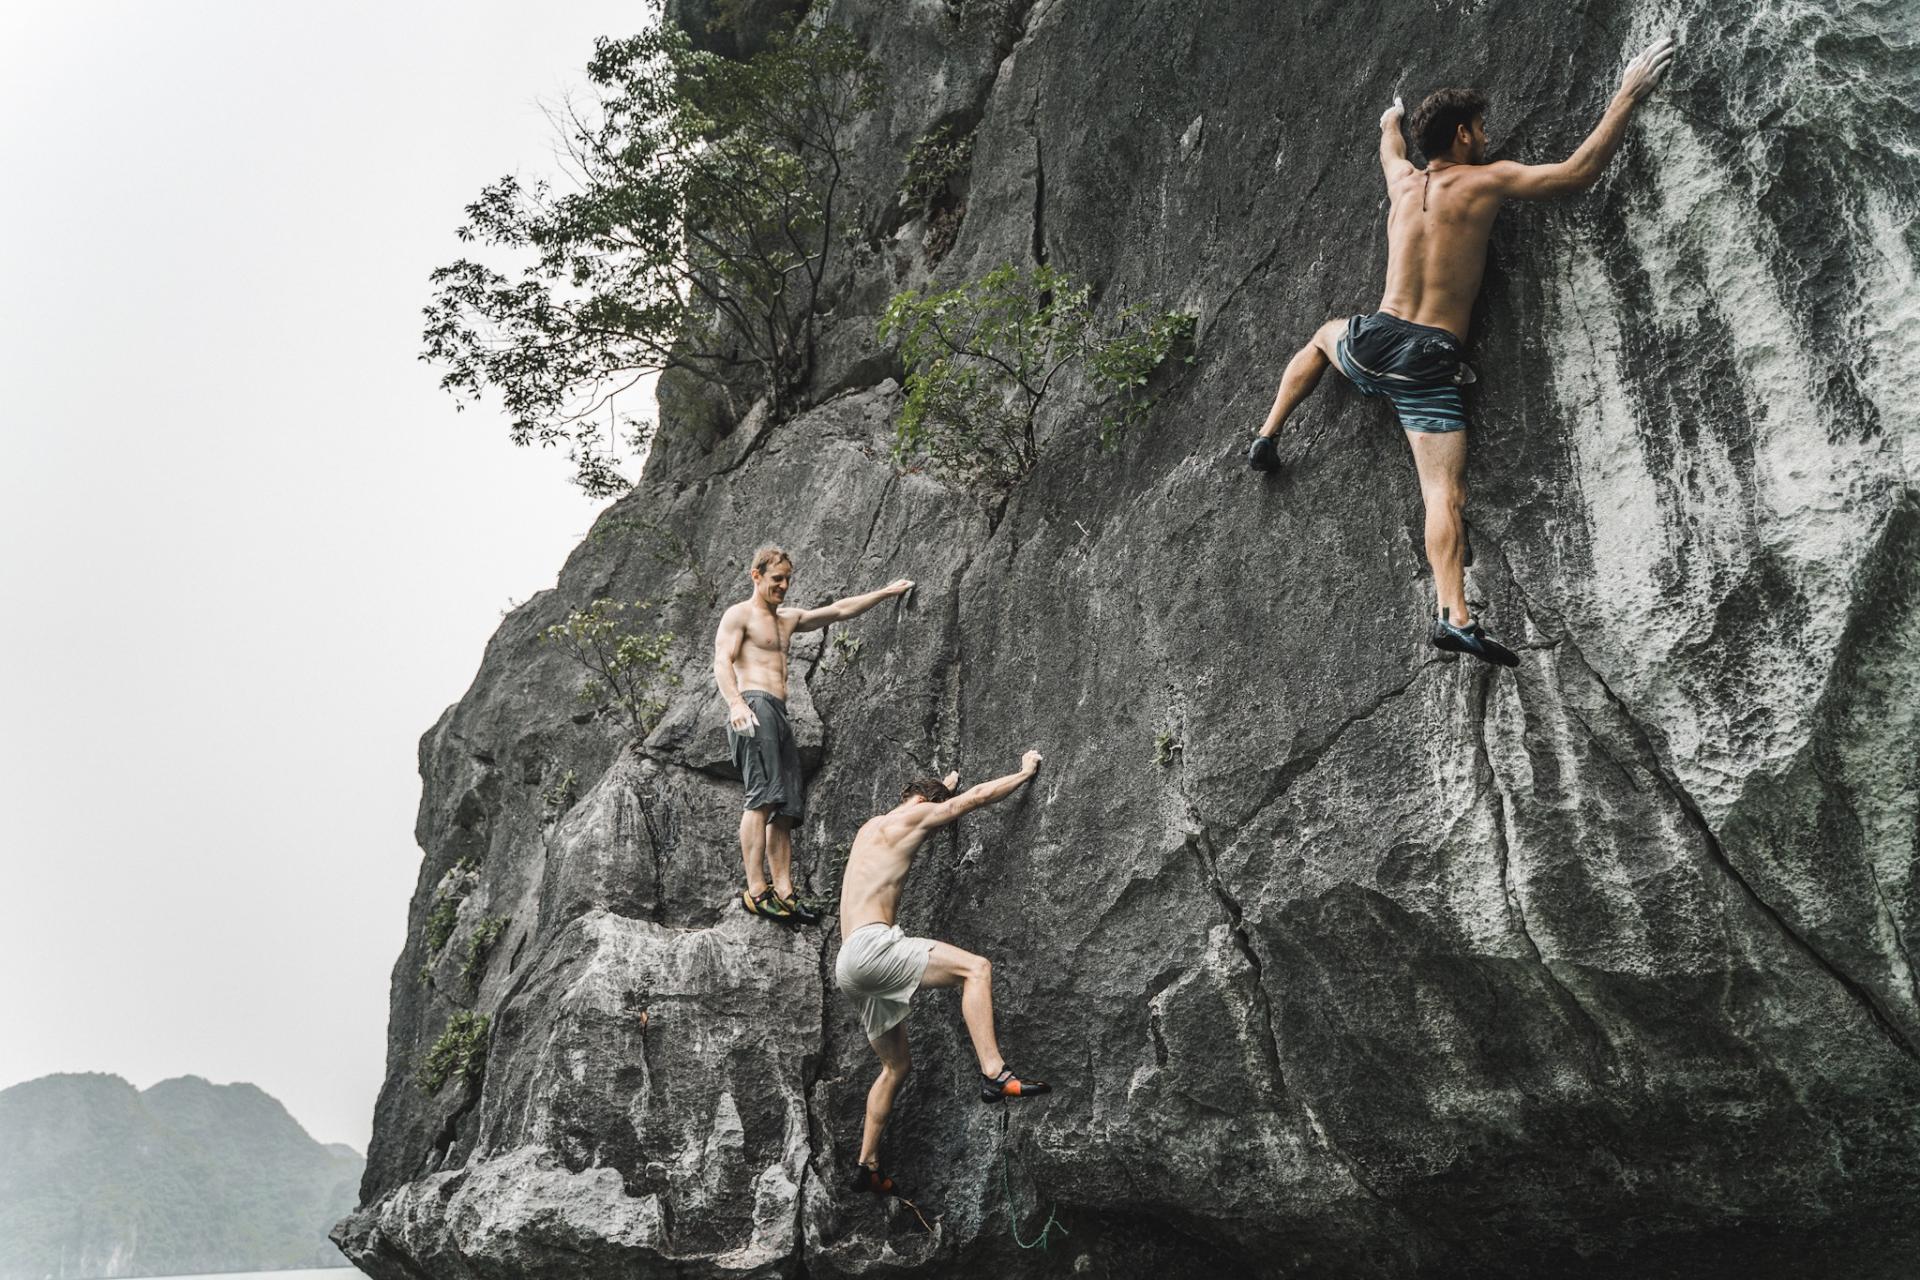 Climbing without rope(soloing) above the sea